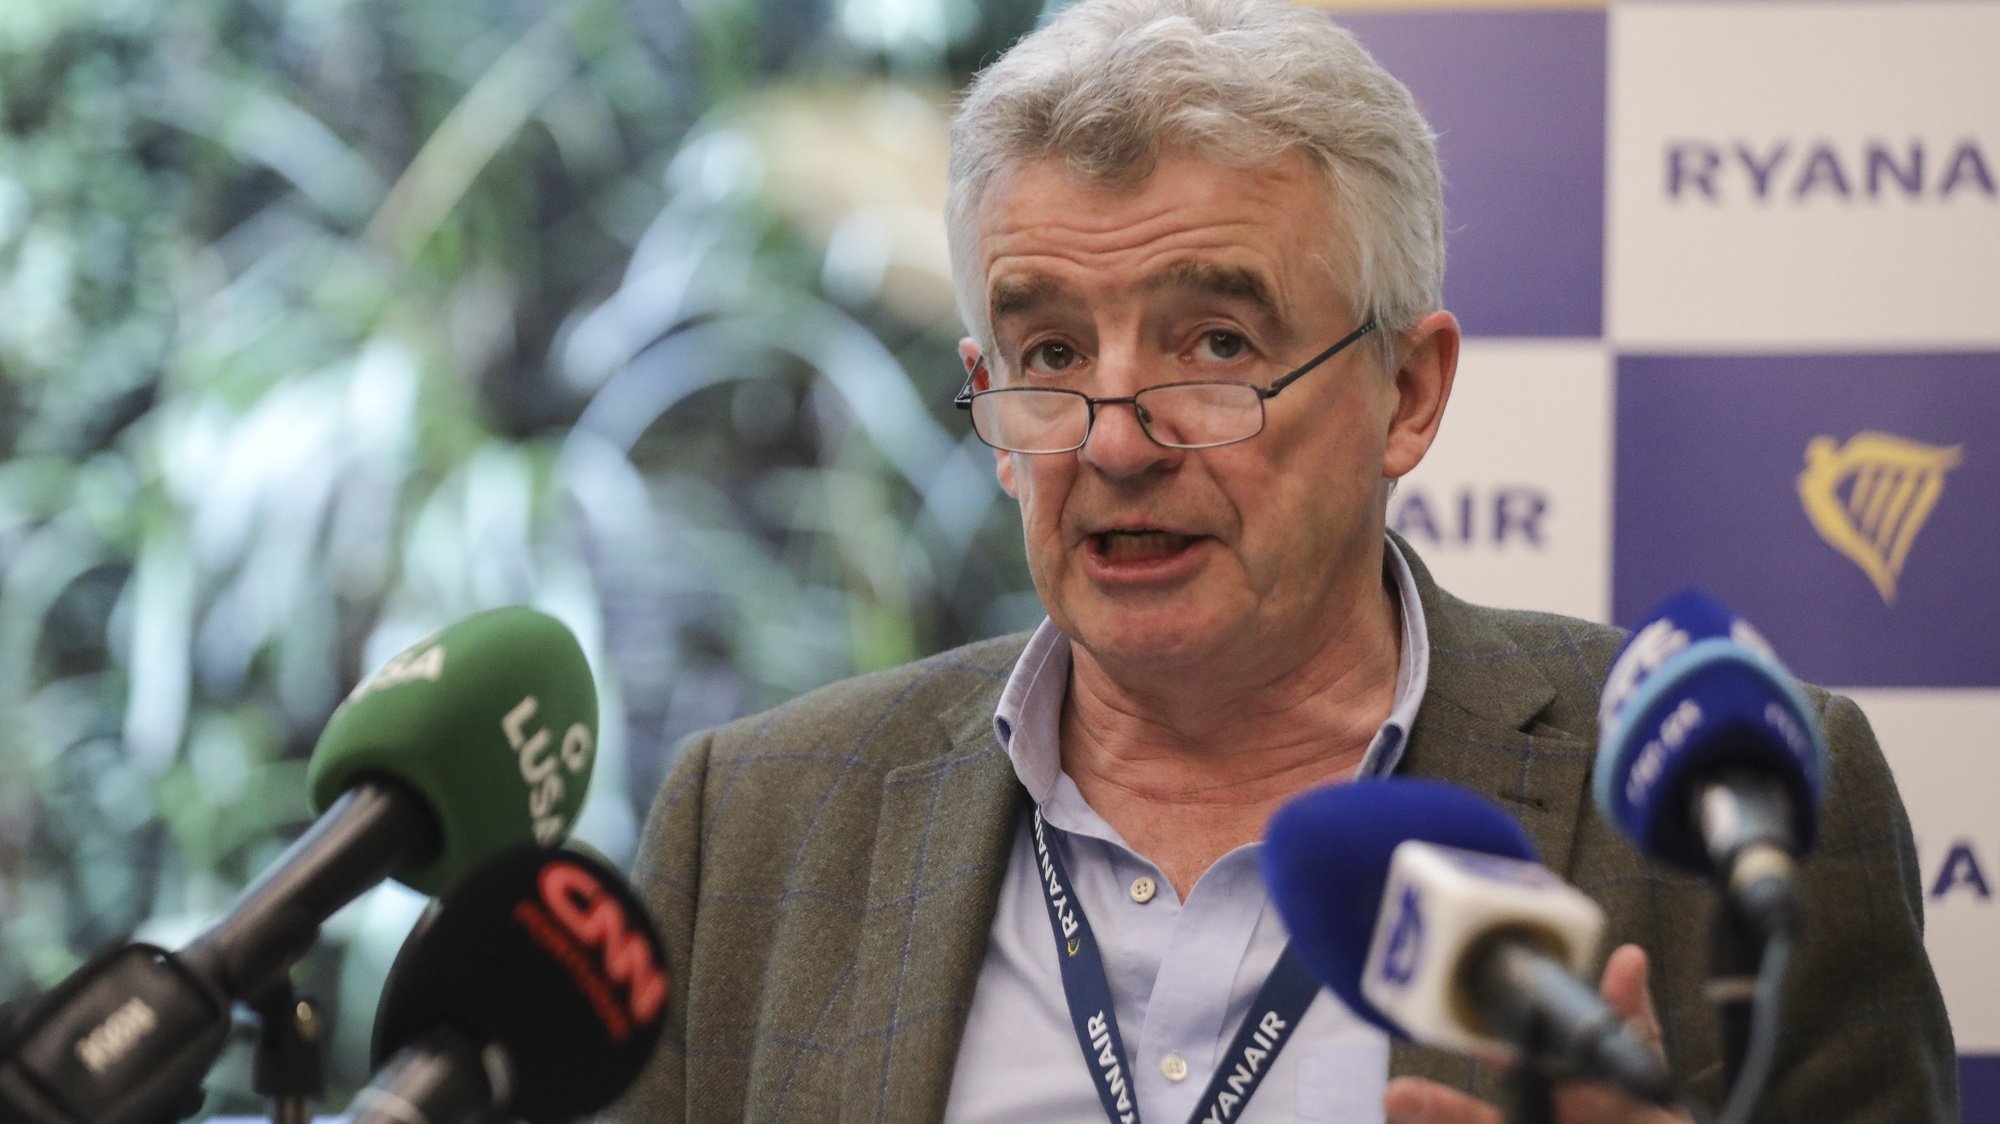 epa09762241 Ryanair CEO Michael O&#039;Leary attends a press conference of Ryanair Group in Lisbon, Portugal, 16 February 2022. Michael O&#039;Leary said that the Irish airline may have to give up 20 routes in Lisbon this summer due to TAP Air Portugal&#039;s accumulation of unused slots.  EPA/MIGUEL A. LOPES